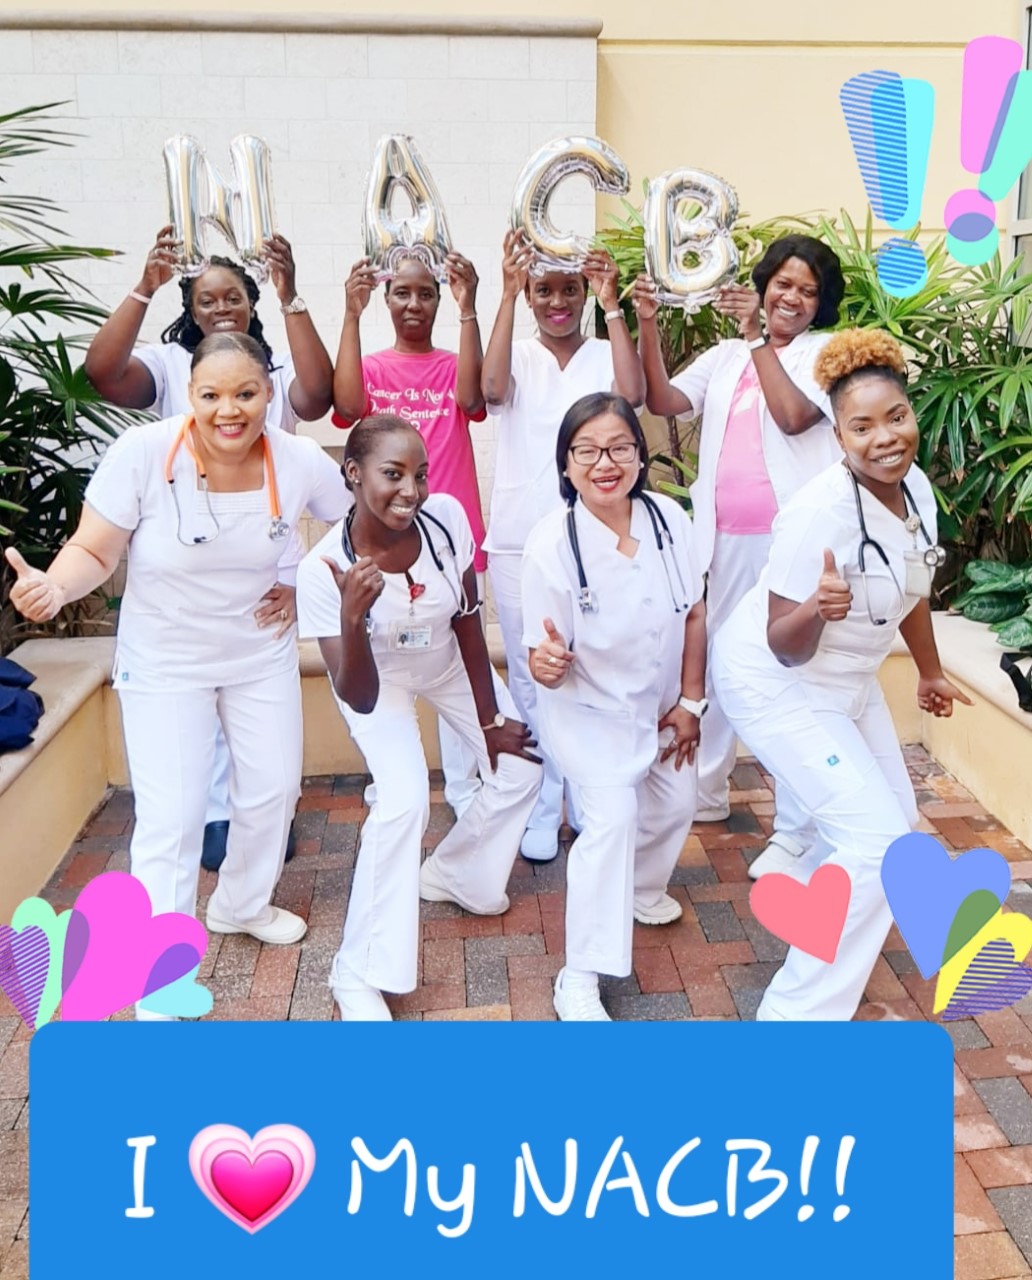 The Nurses Association Of The Commonwealth Of The Bahamas